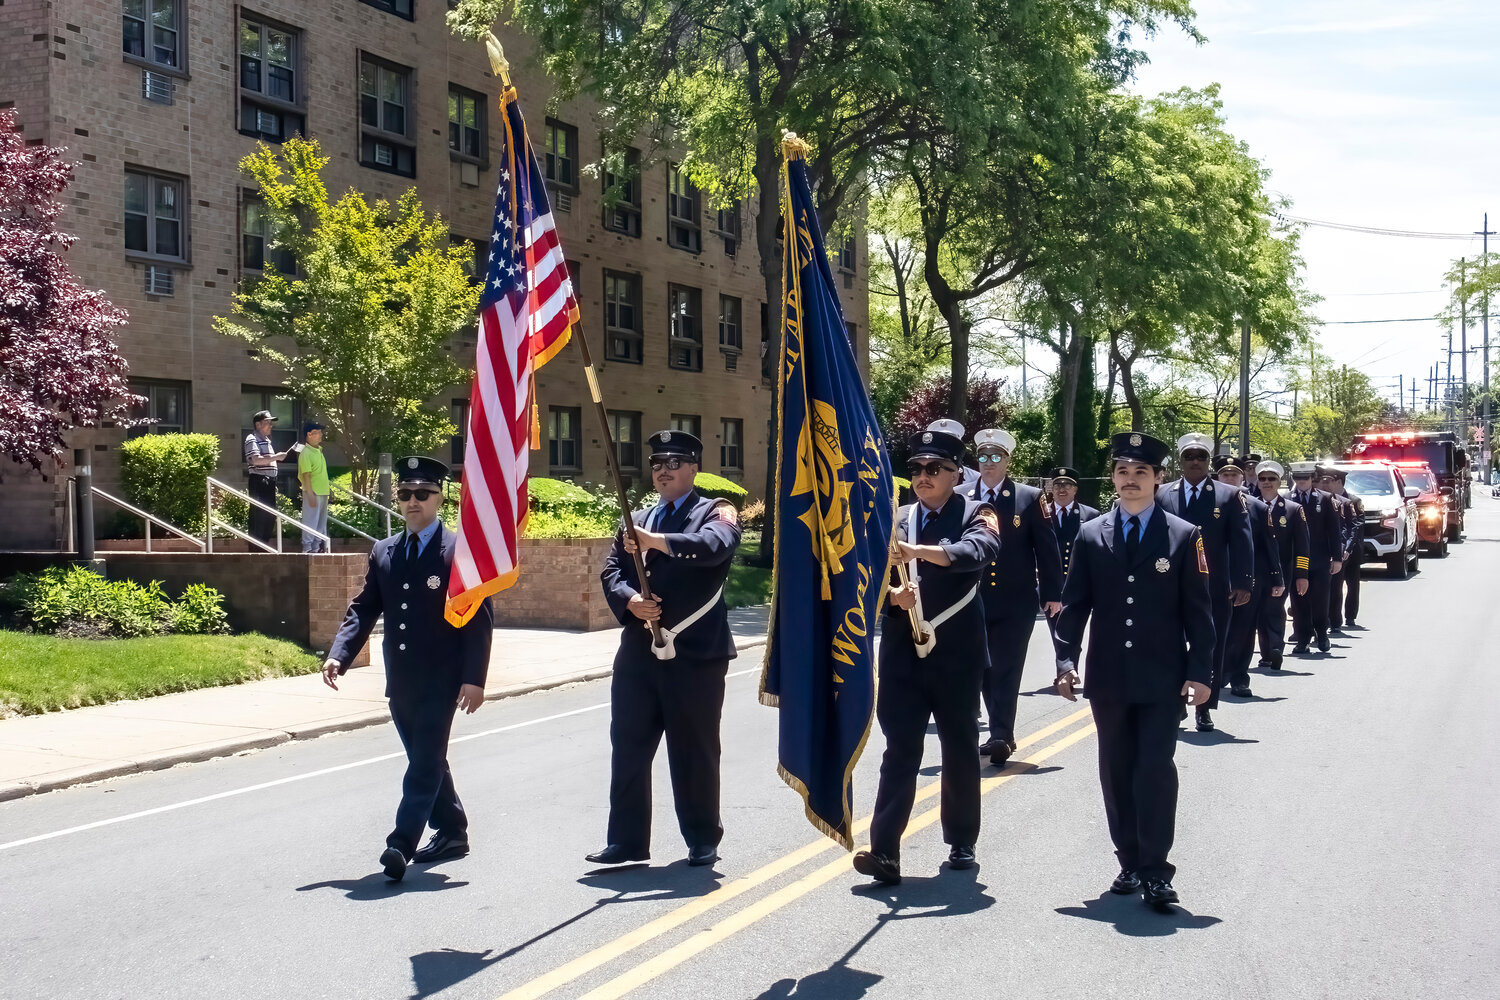 The Inwood Fire Department moved along Doughty Boulevard as part of the Memorial Day Parade on Sunday.